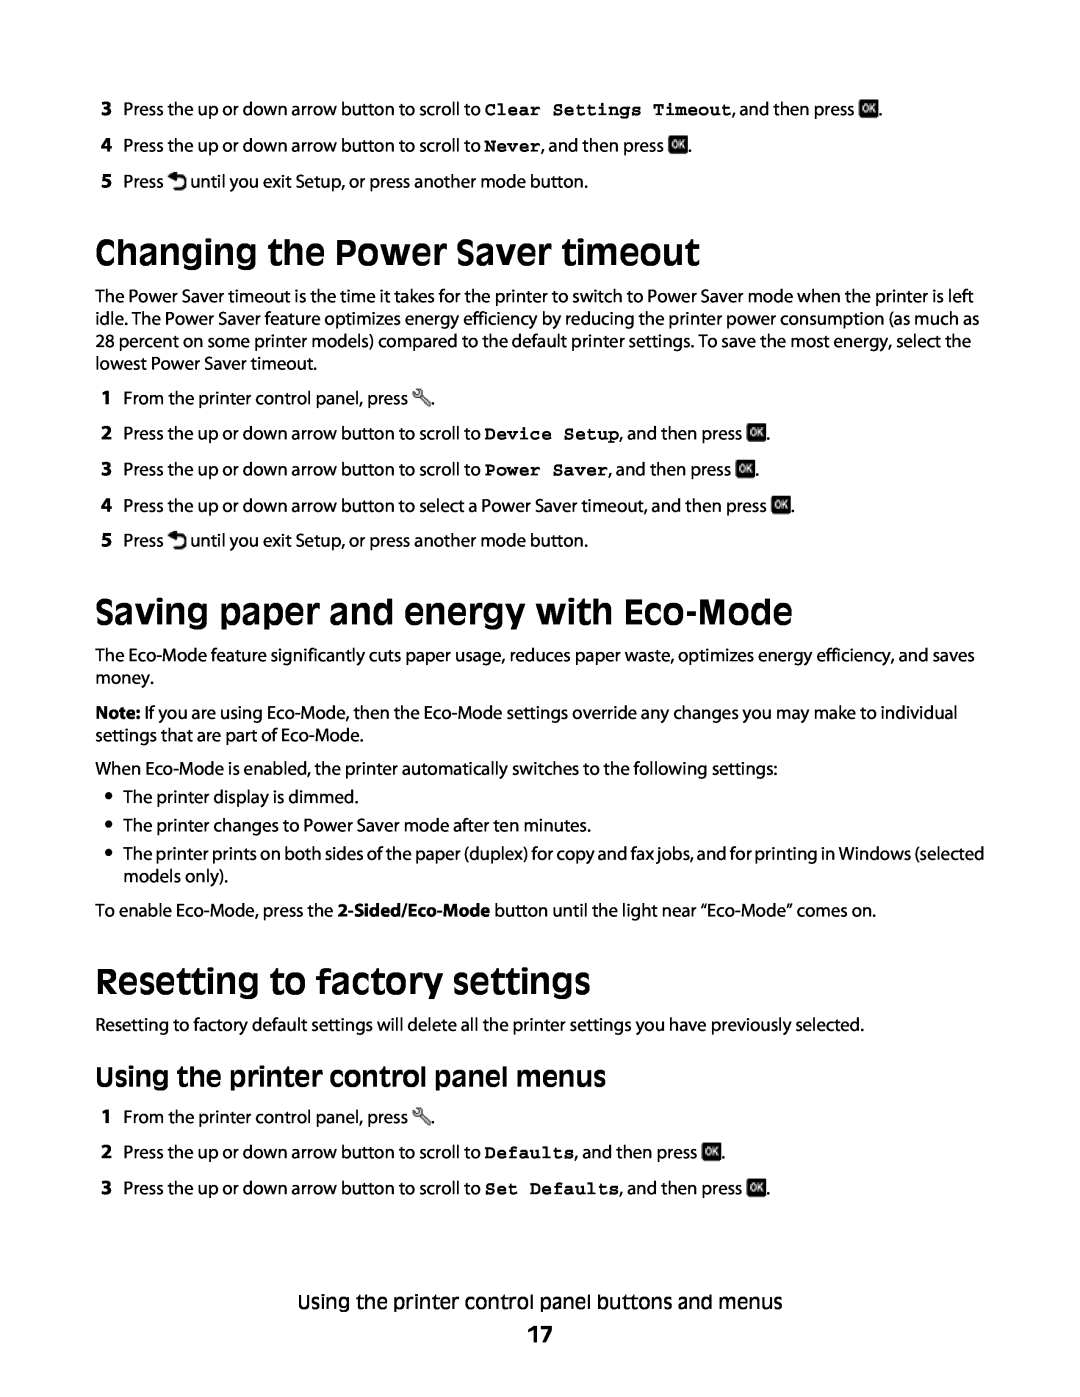 Lexmark 301, S500 Changing the Power Saver timeout, Saving paper and energy with Eco-Mode, Resetting to factory settings 